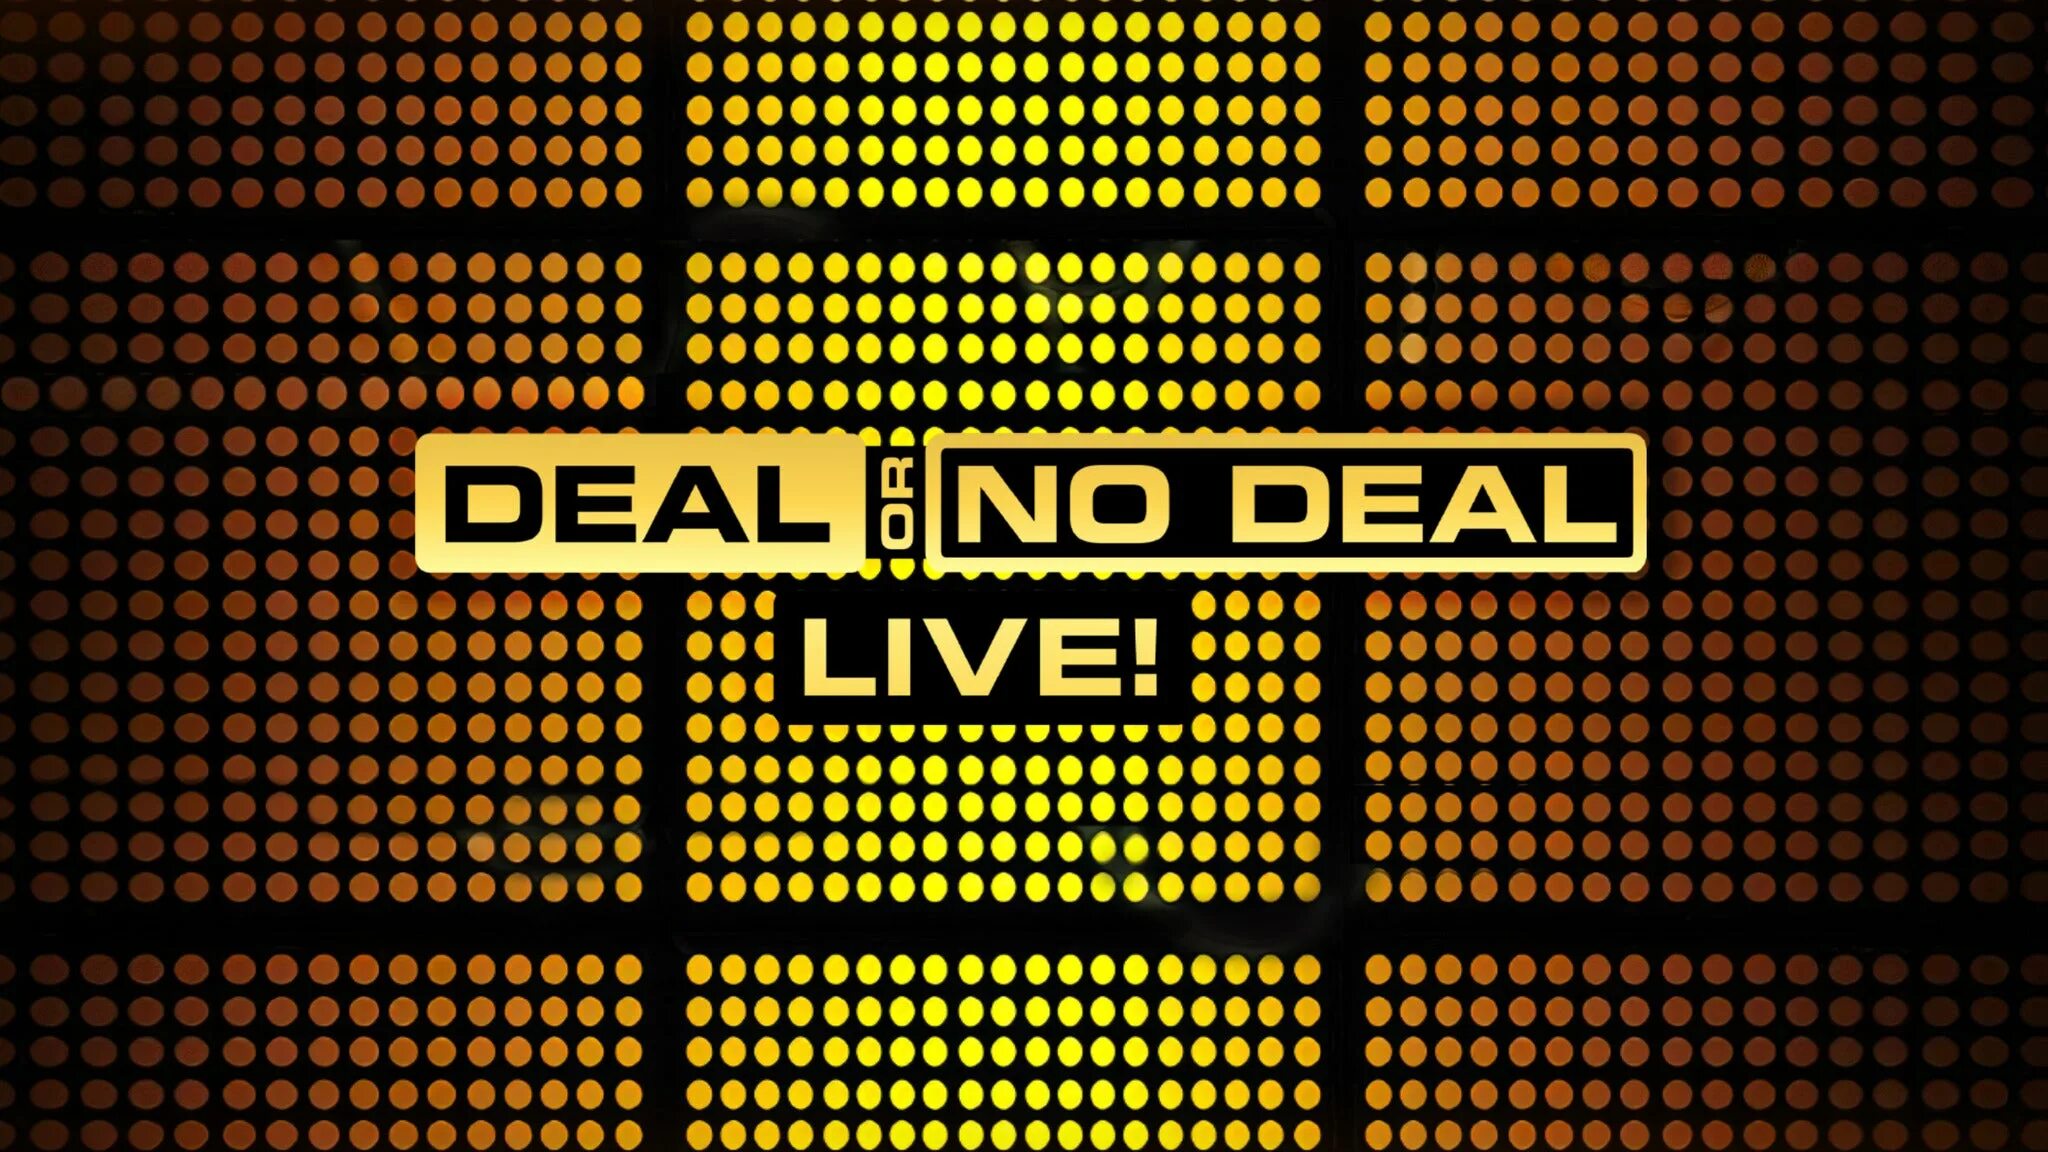 0 deal. No deal. Deal or no deal ticket. Deal or no deal Live show. Deal or no deal Boxes.